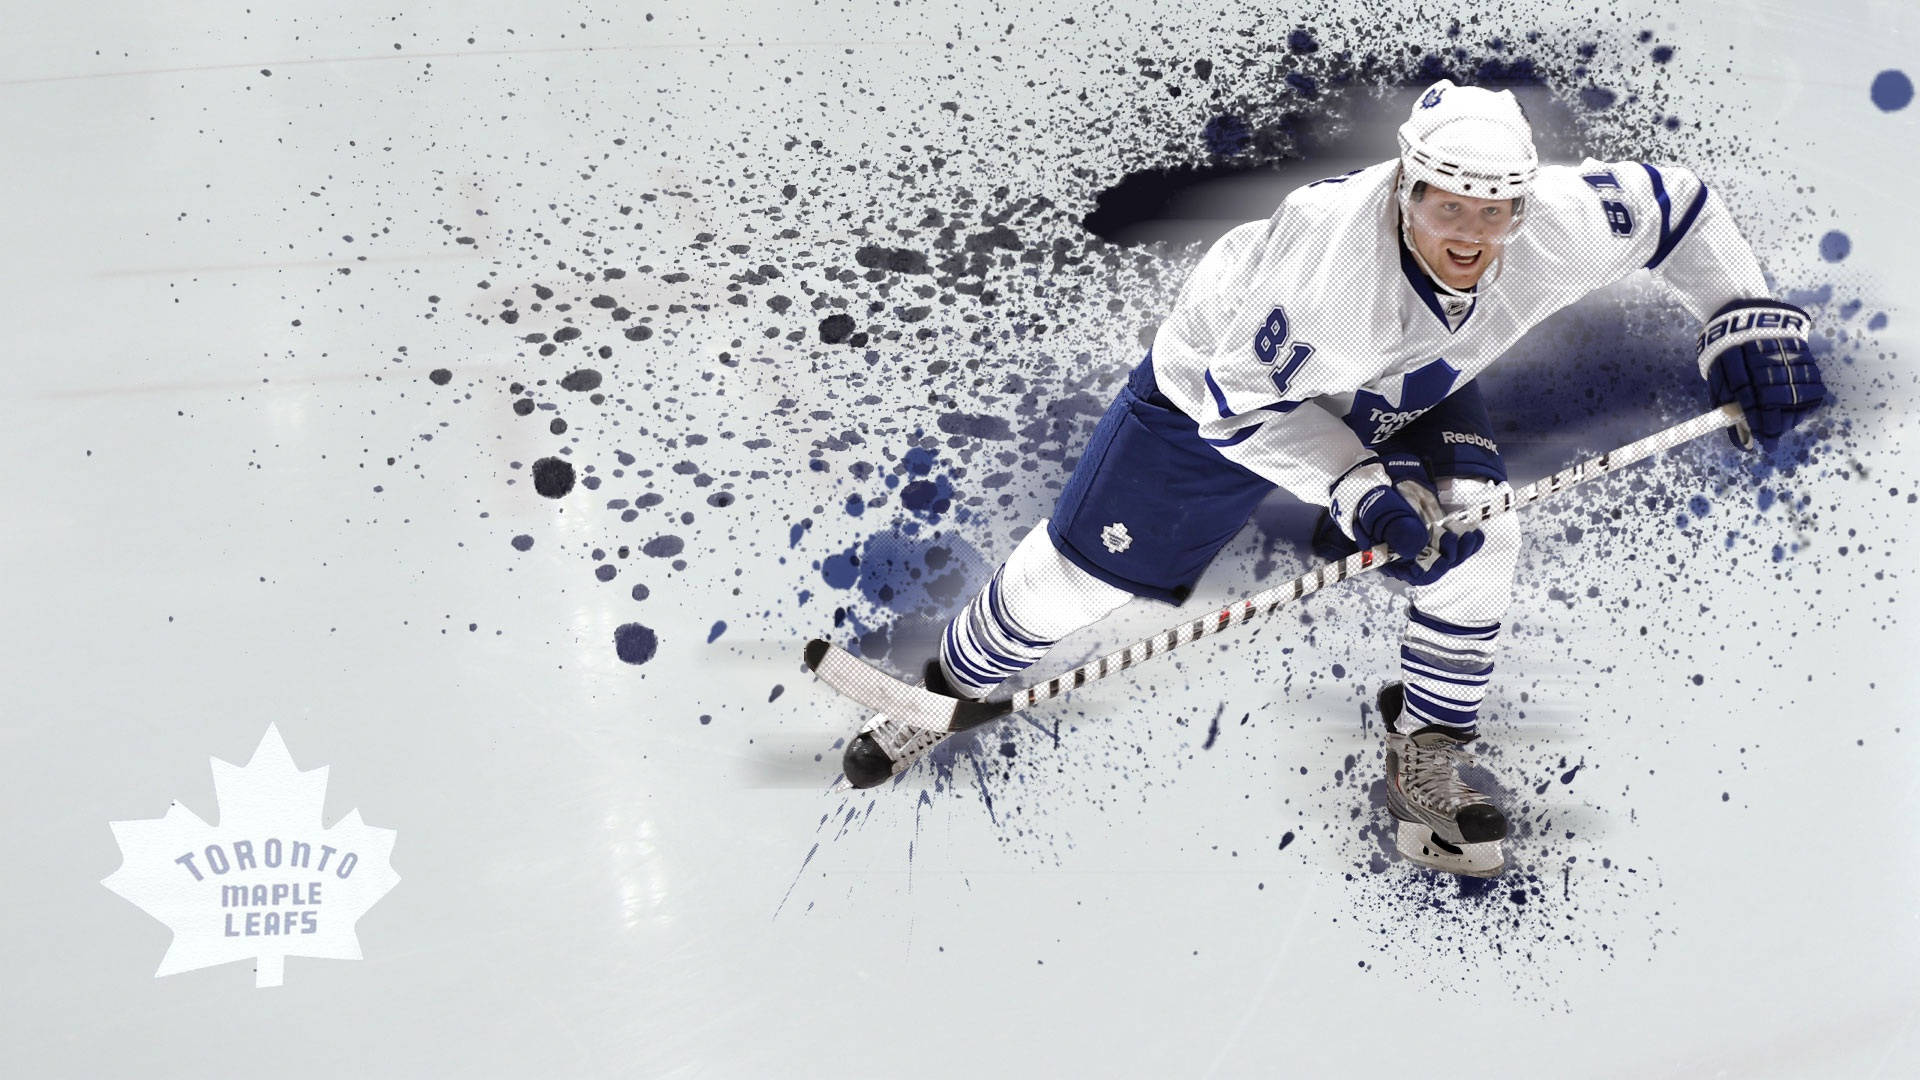 Valiant Hockey Player, Number 81, From Toronto Maple Leafs In Action.